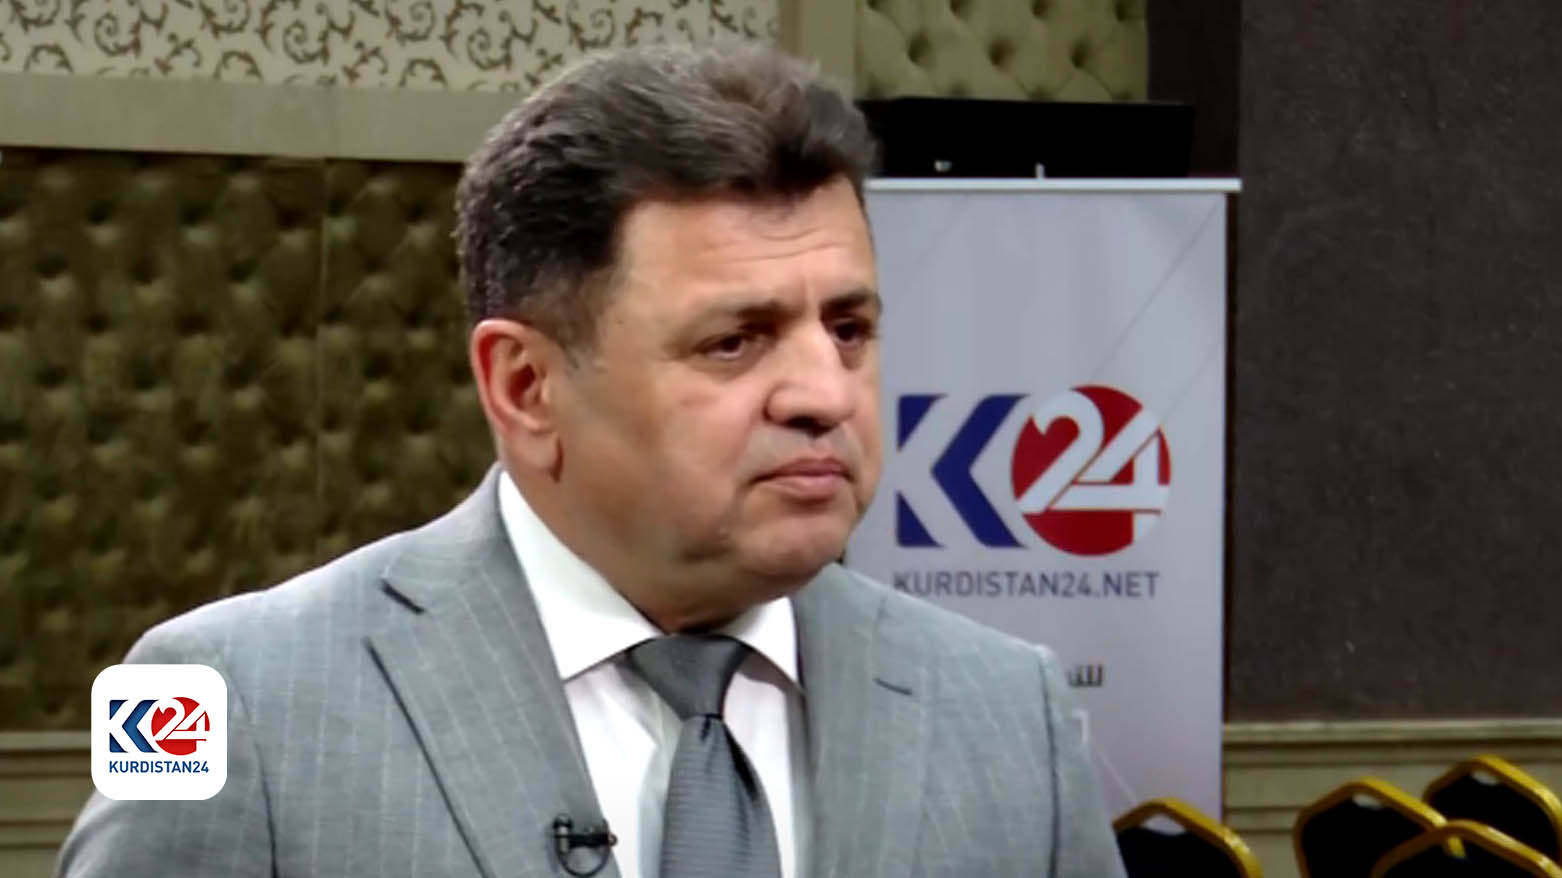 Kurdistan is one of Iraqs most influential broadcast channels says General Manager